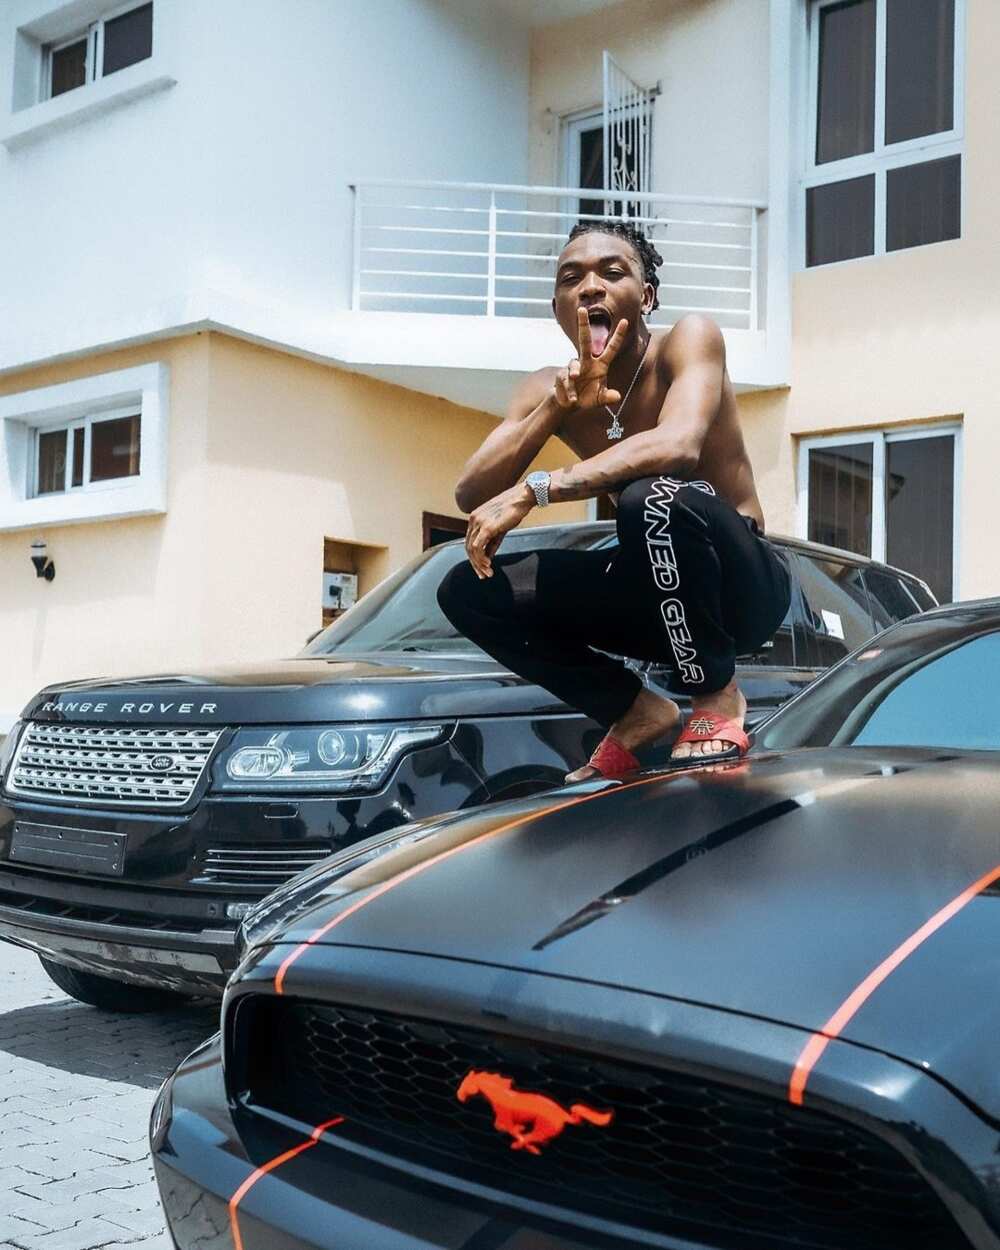 Mayorkun biography: age, mother, net worth, wife, songs, albums - Legit.ng